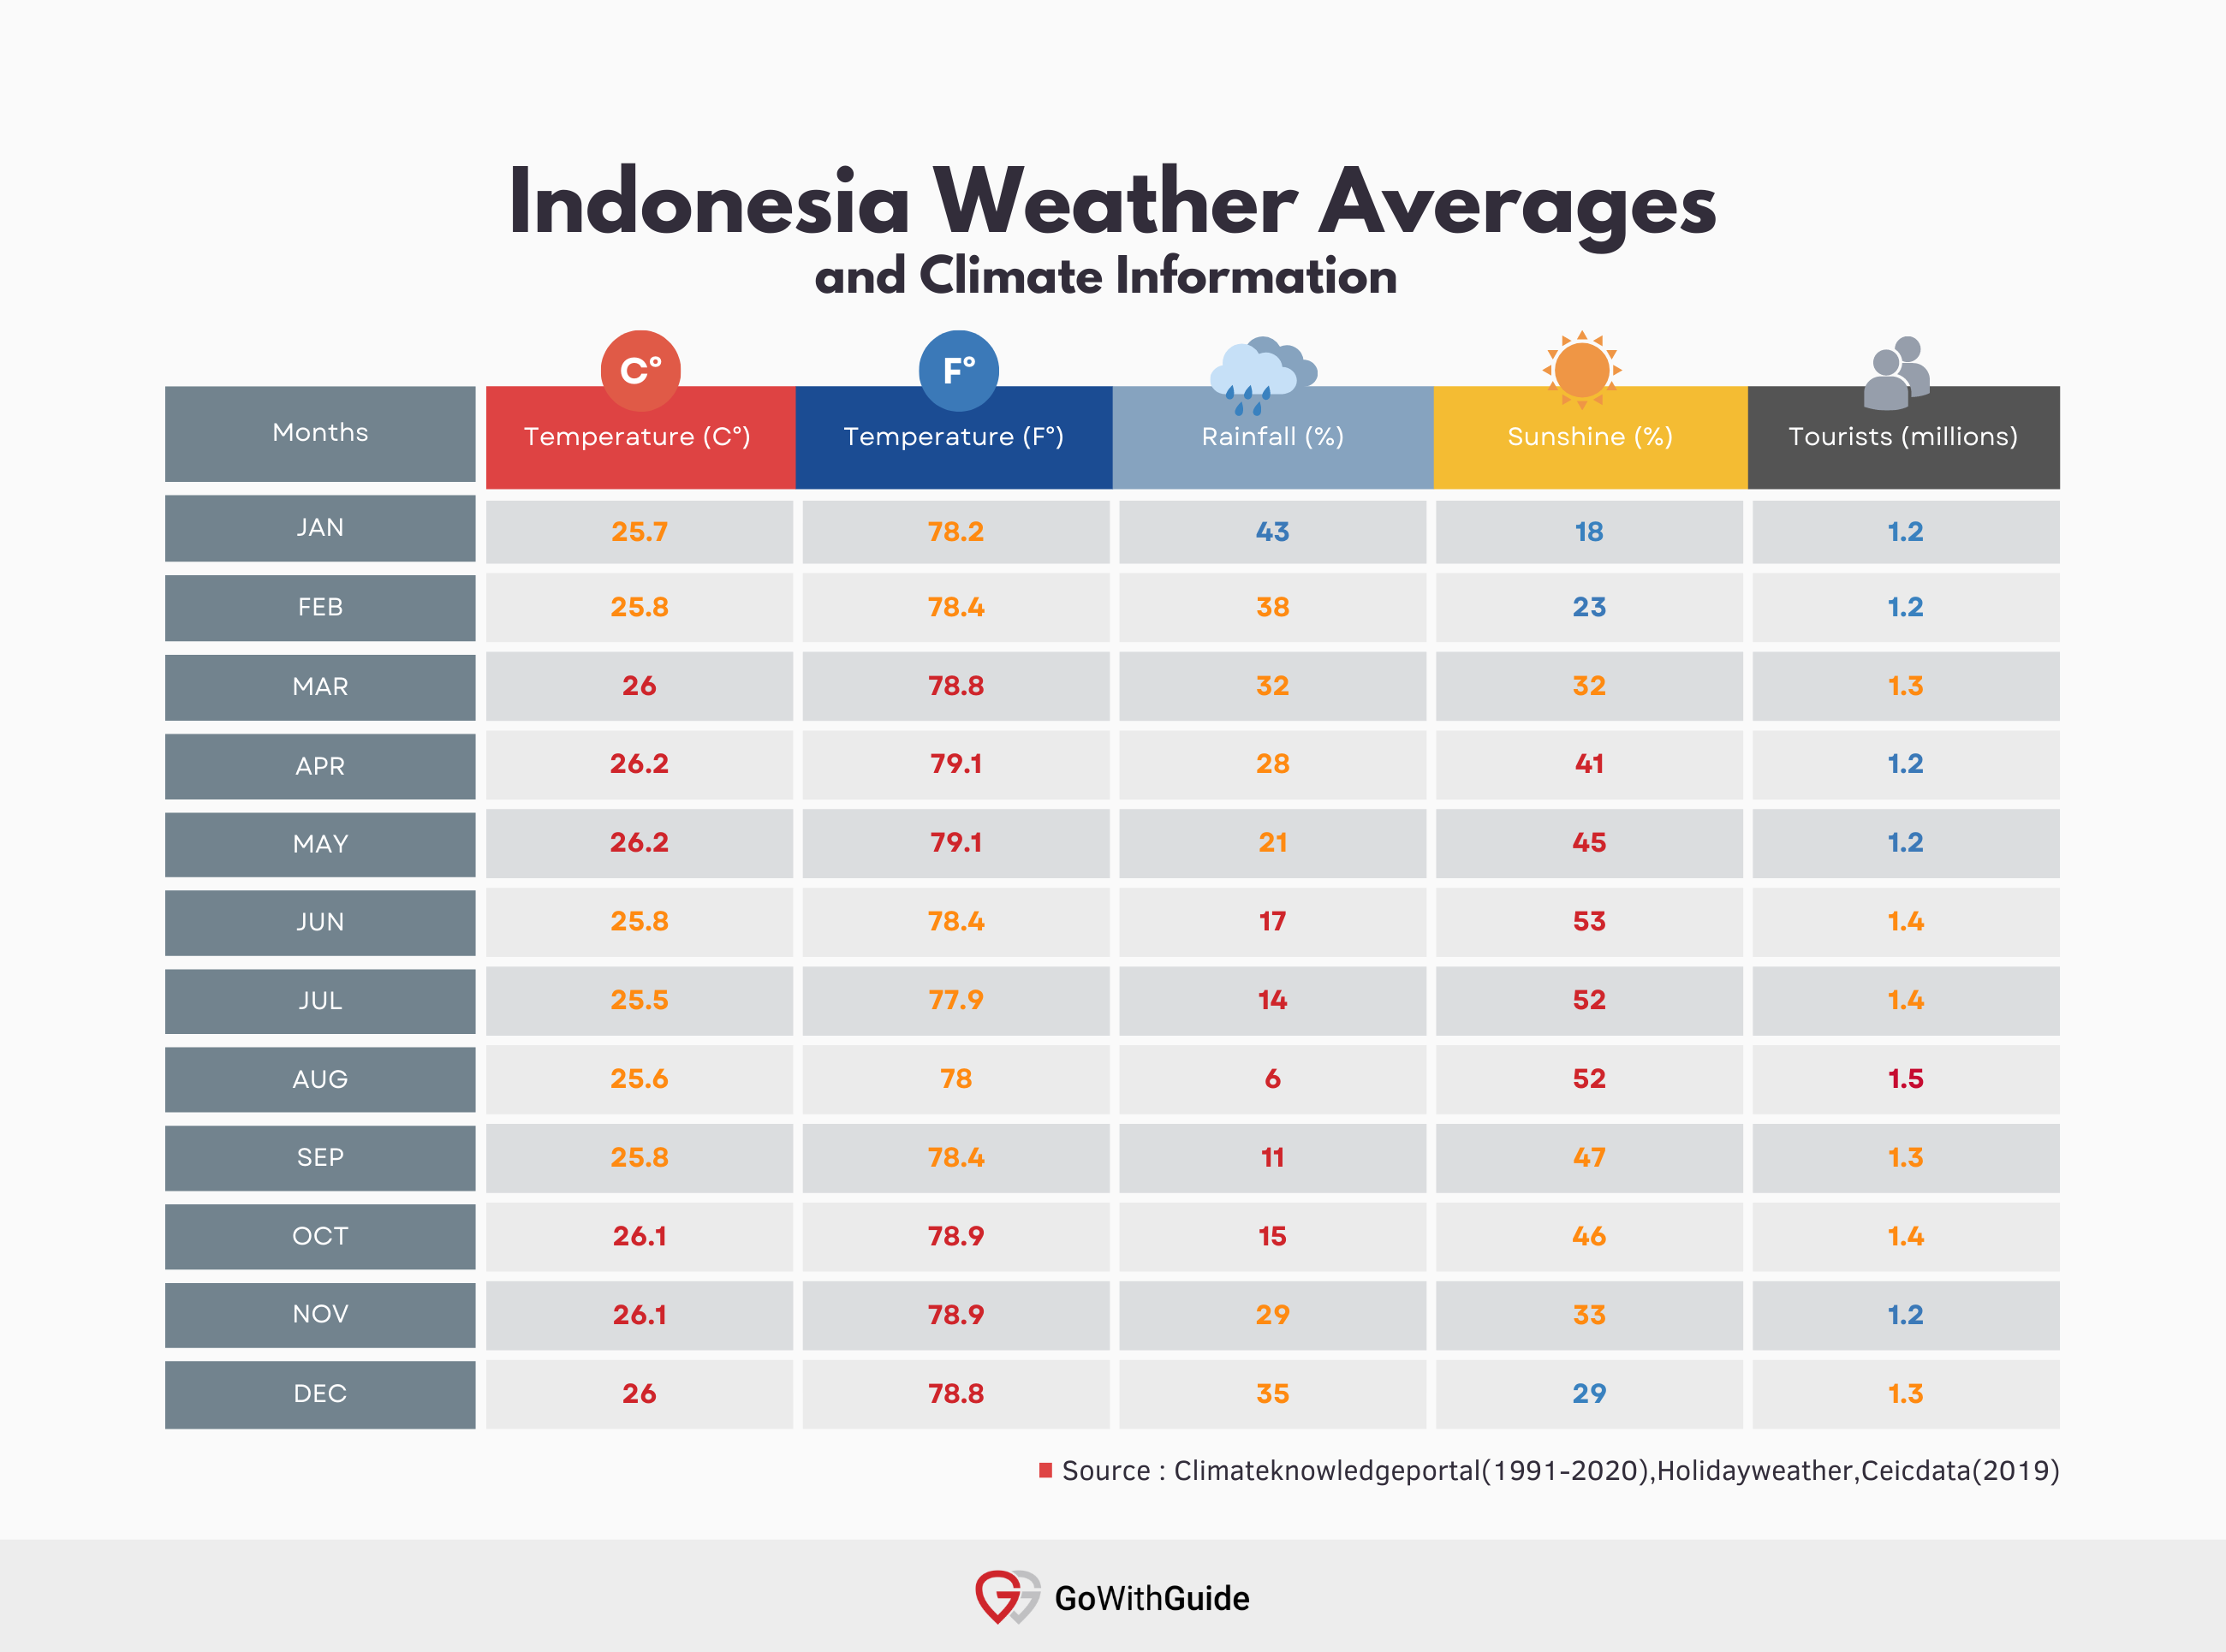 Indonesia Annual Weather Averages